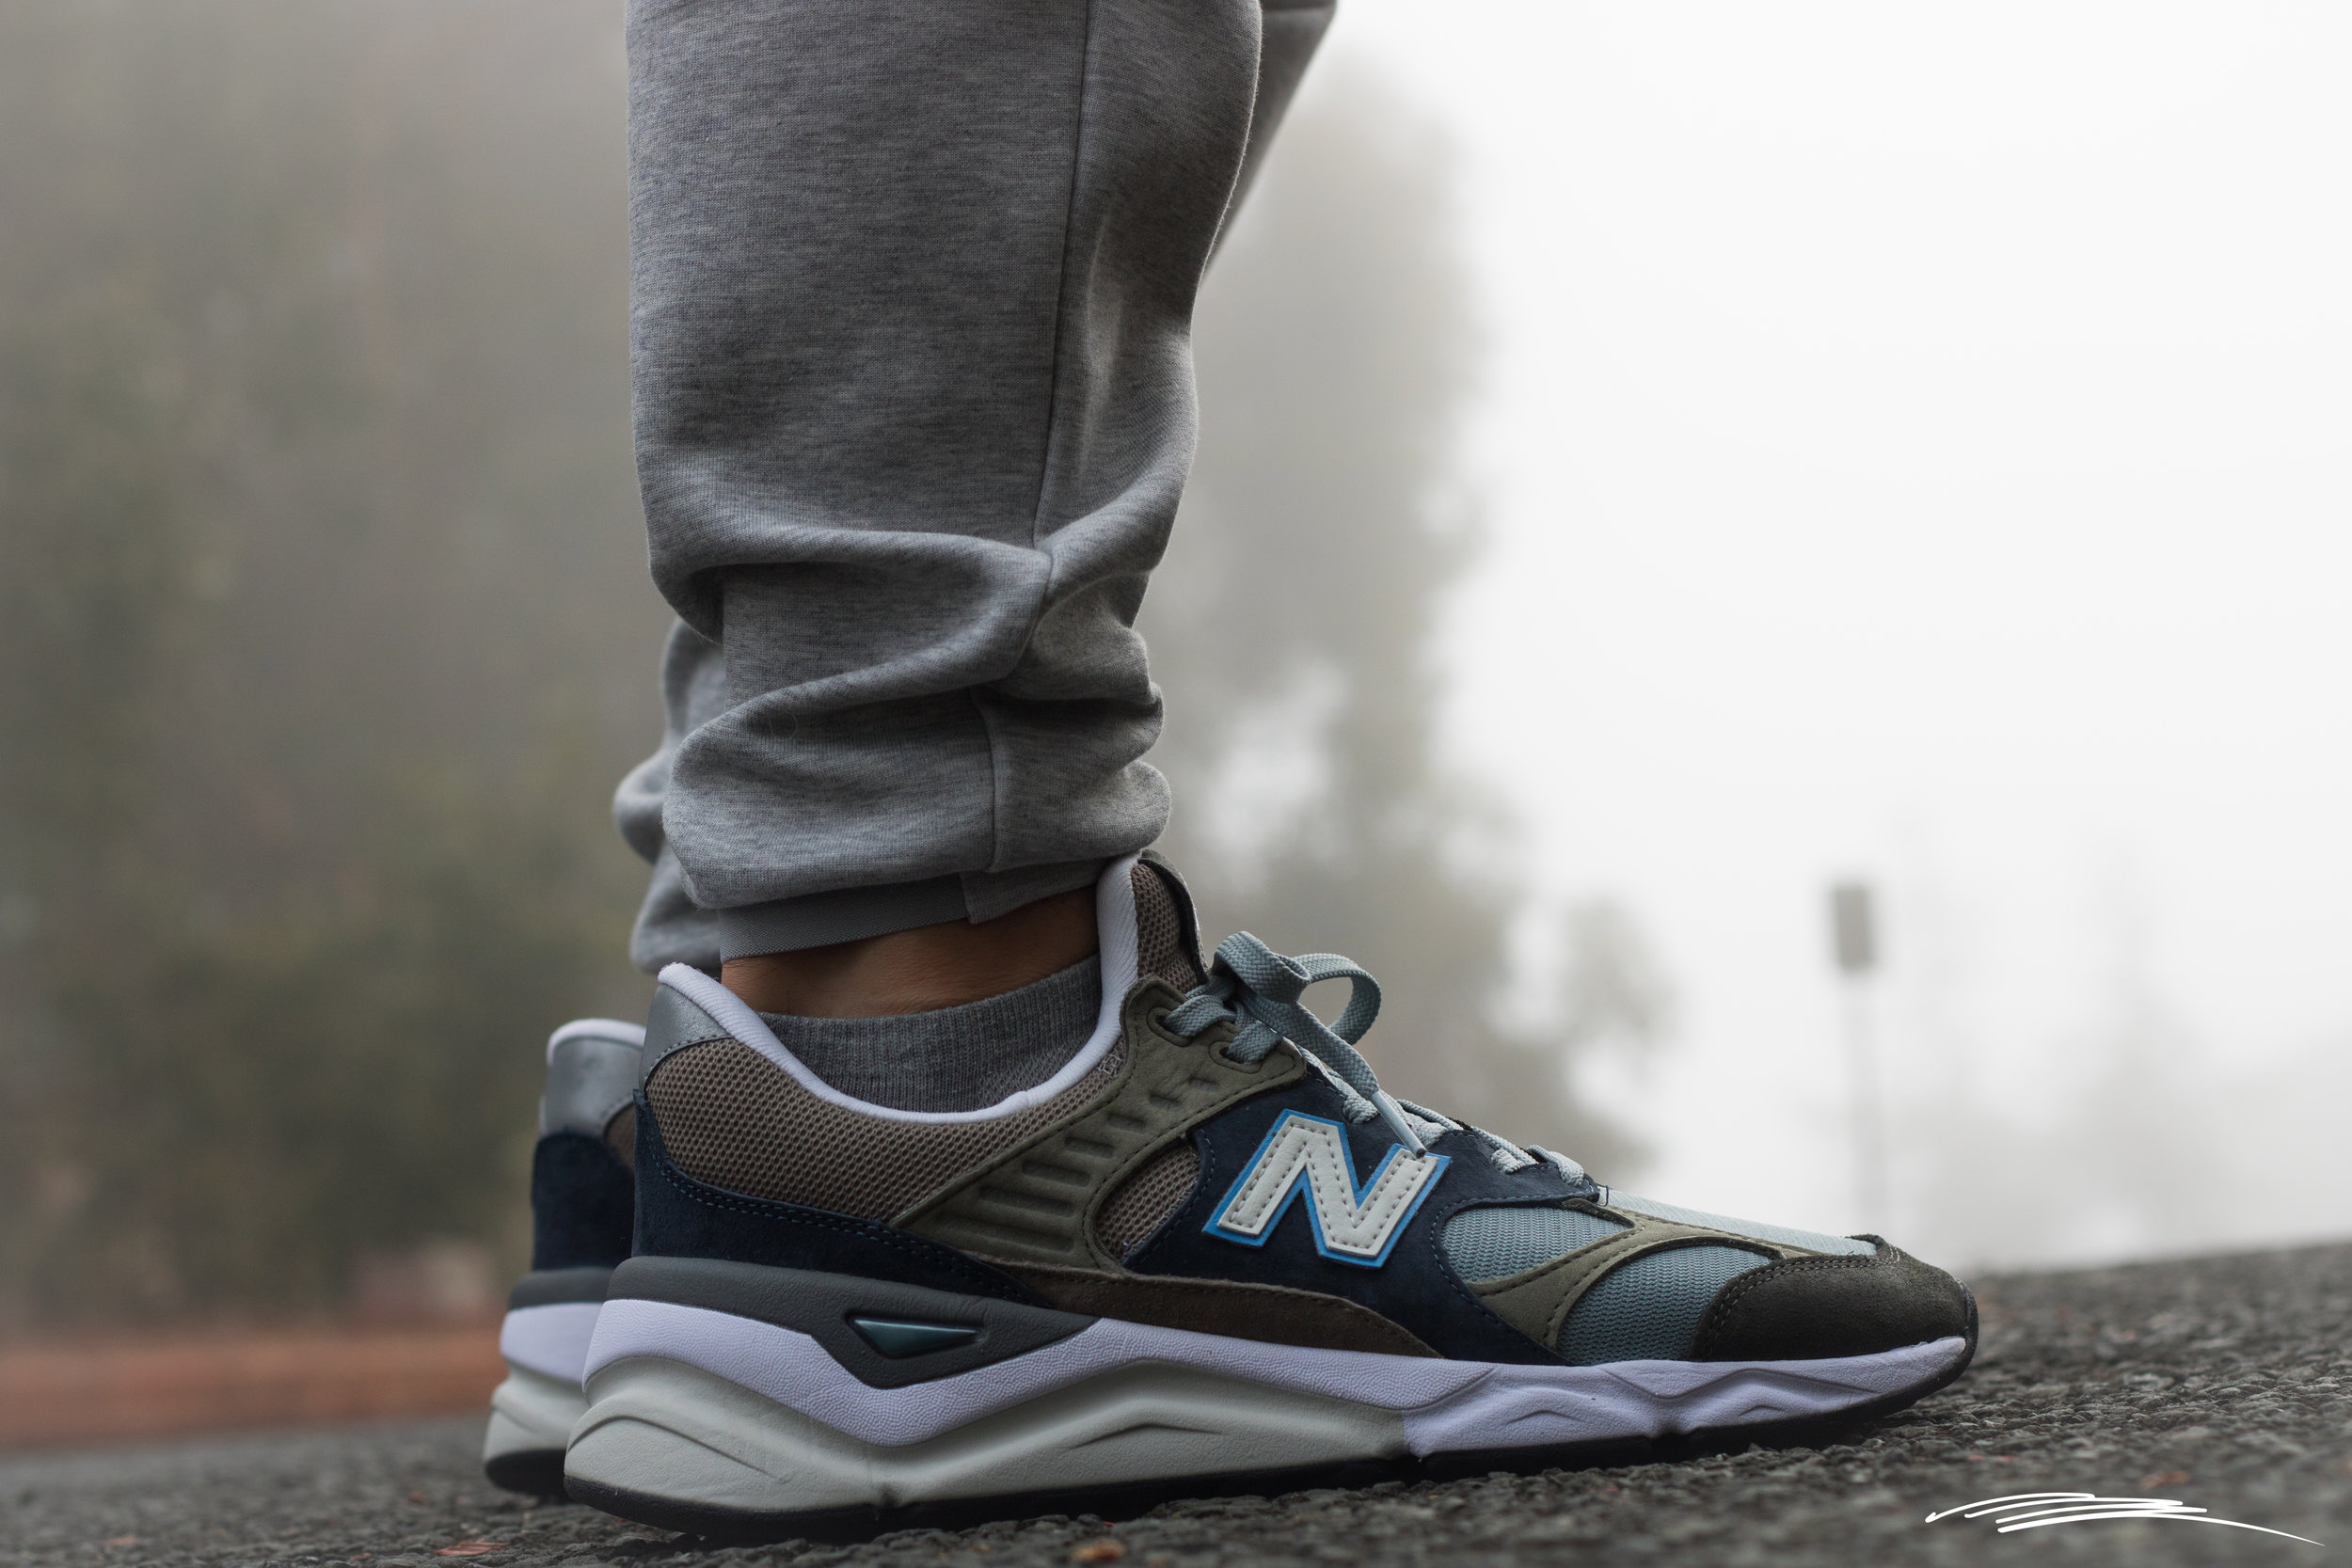 new balance x90 packer shoes infinity